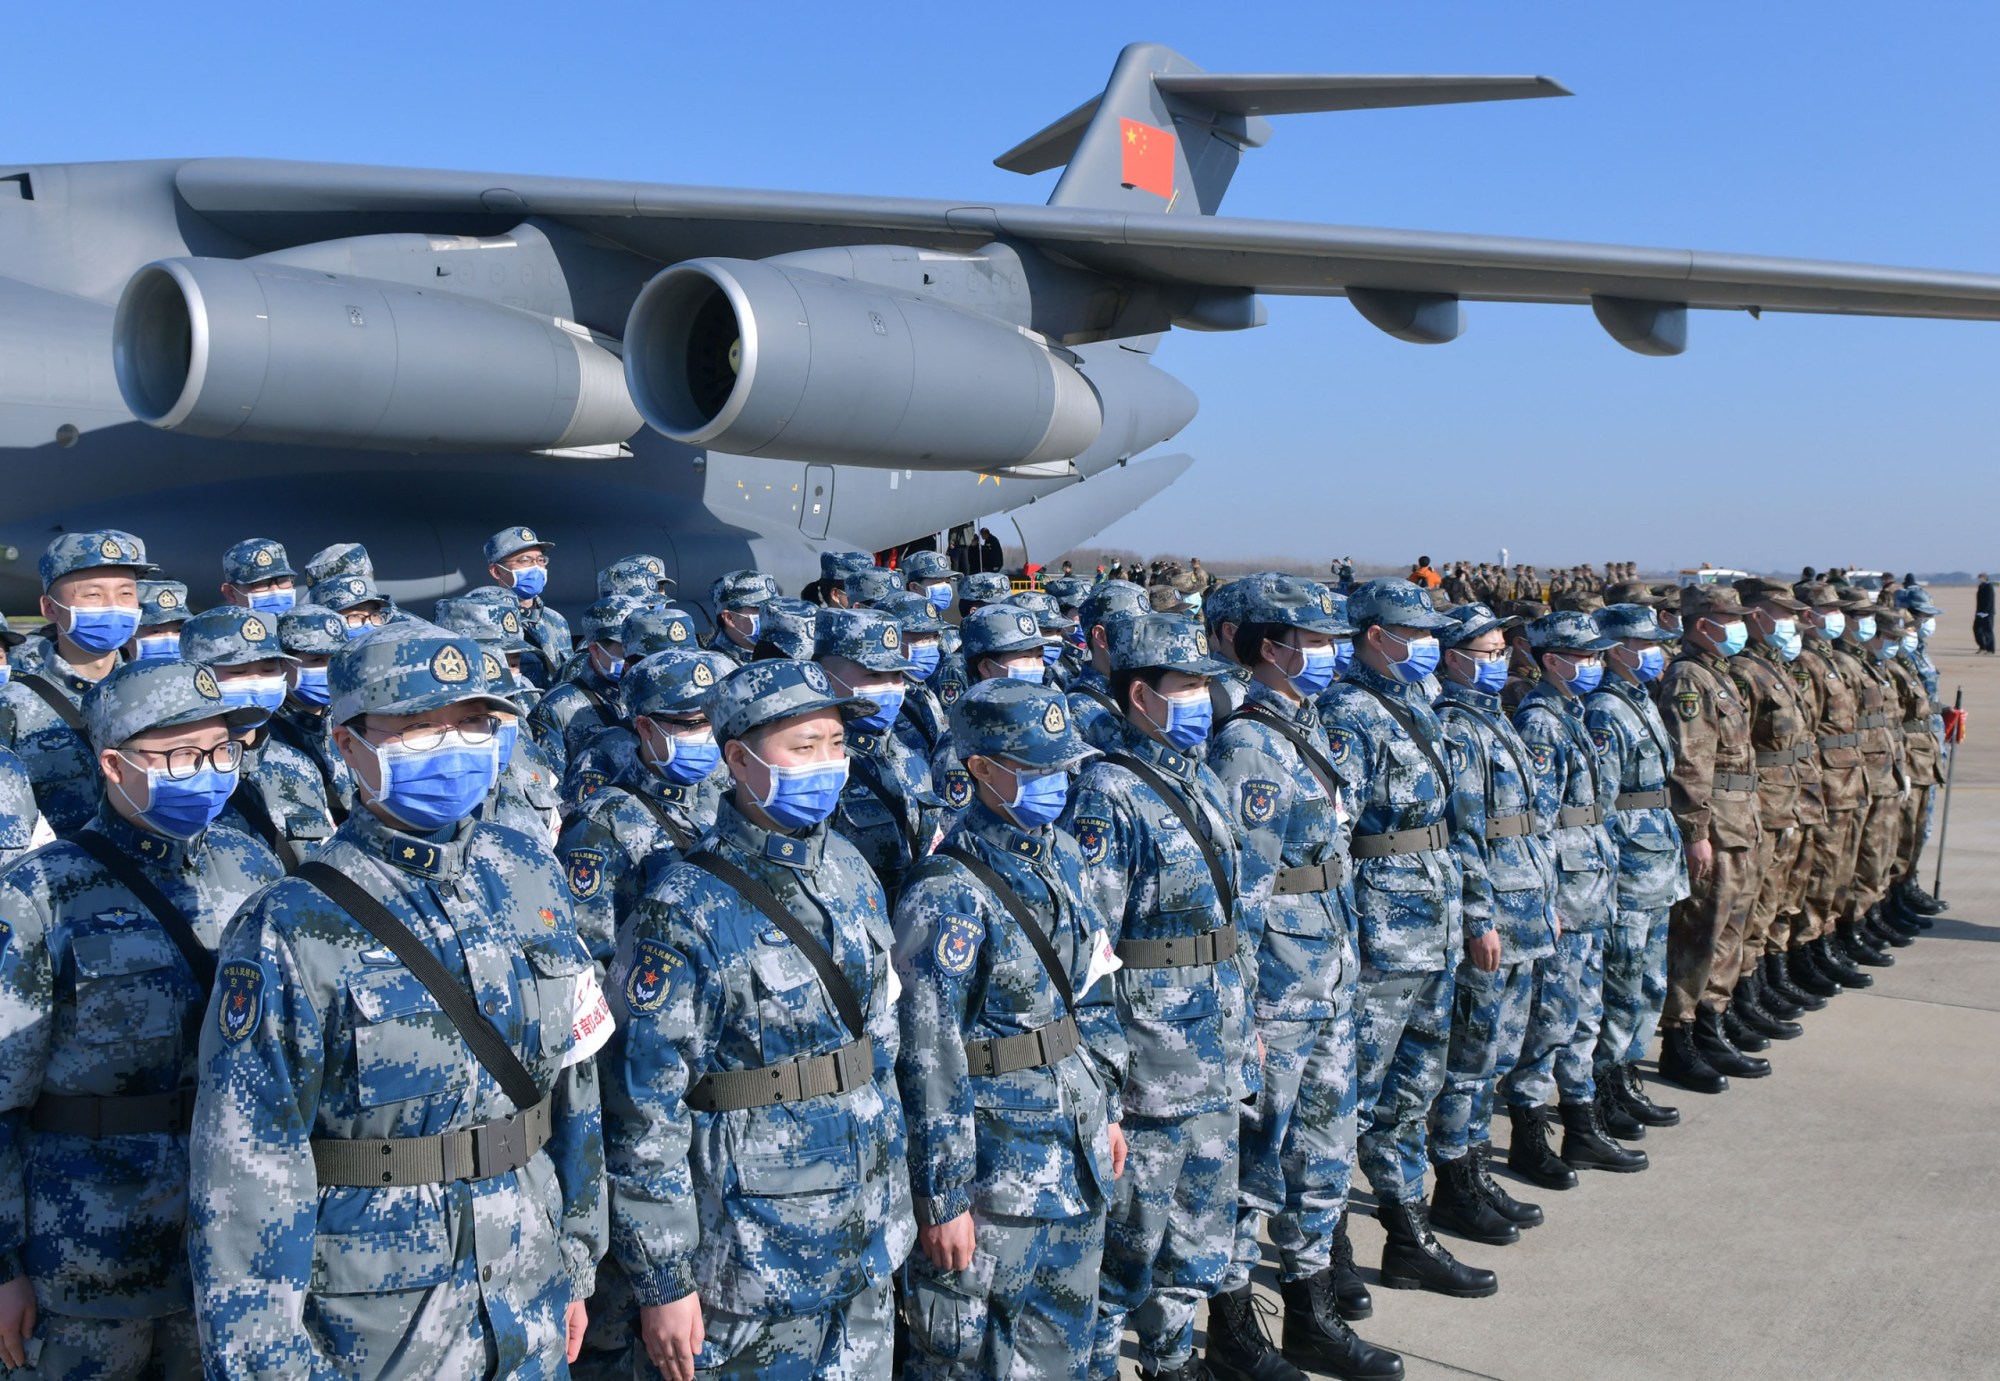 Military medics stand in formation after deplaning a transport aircraft at Tianhe International Airport in Wuhan, China, on February 17, 2020. (Getty/Li He)